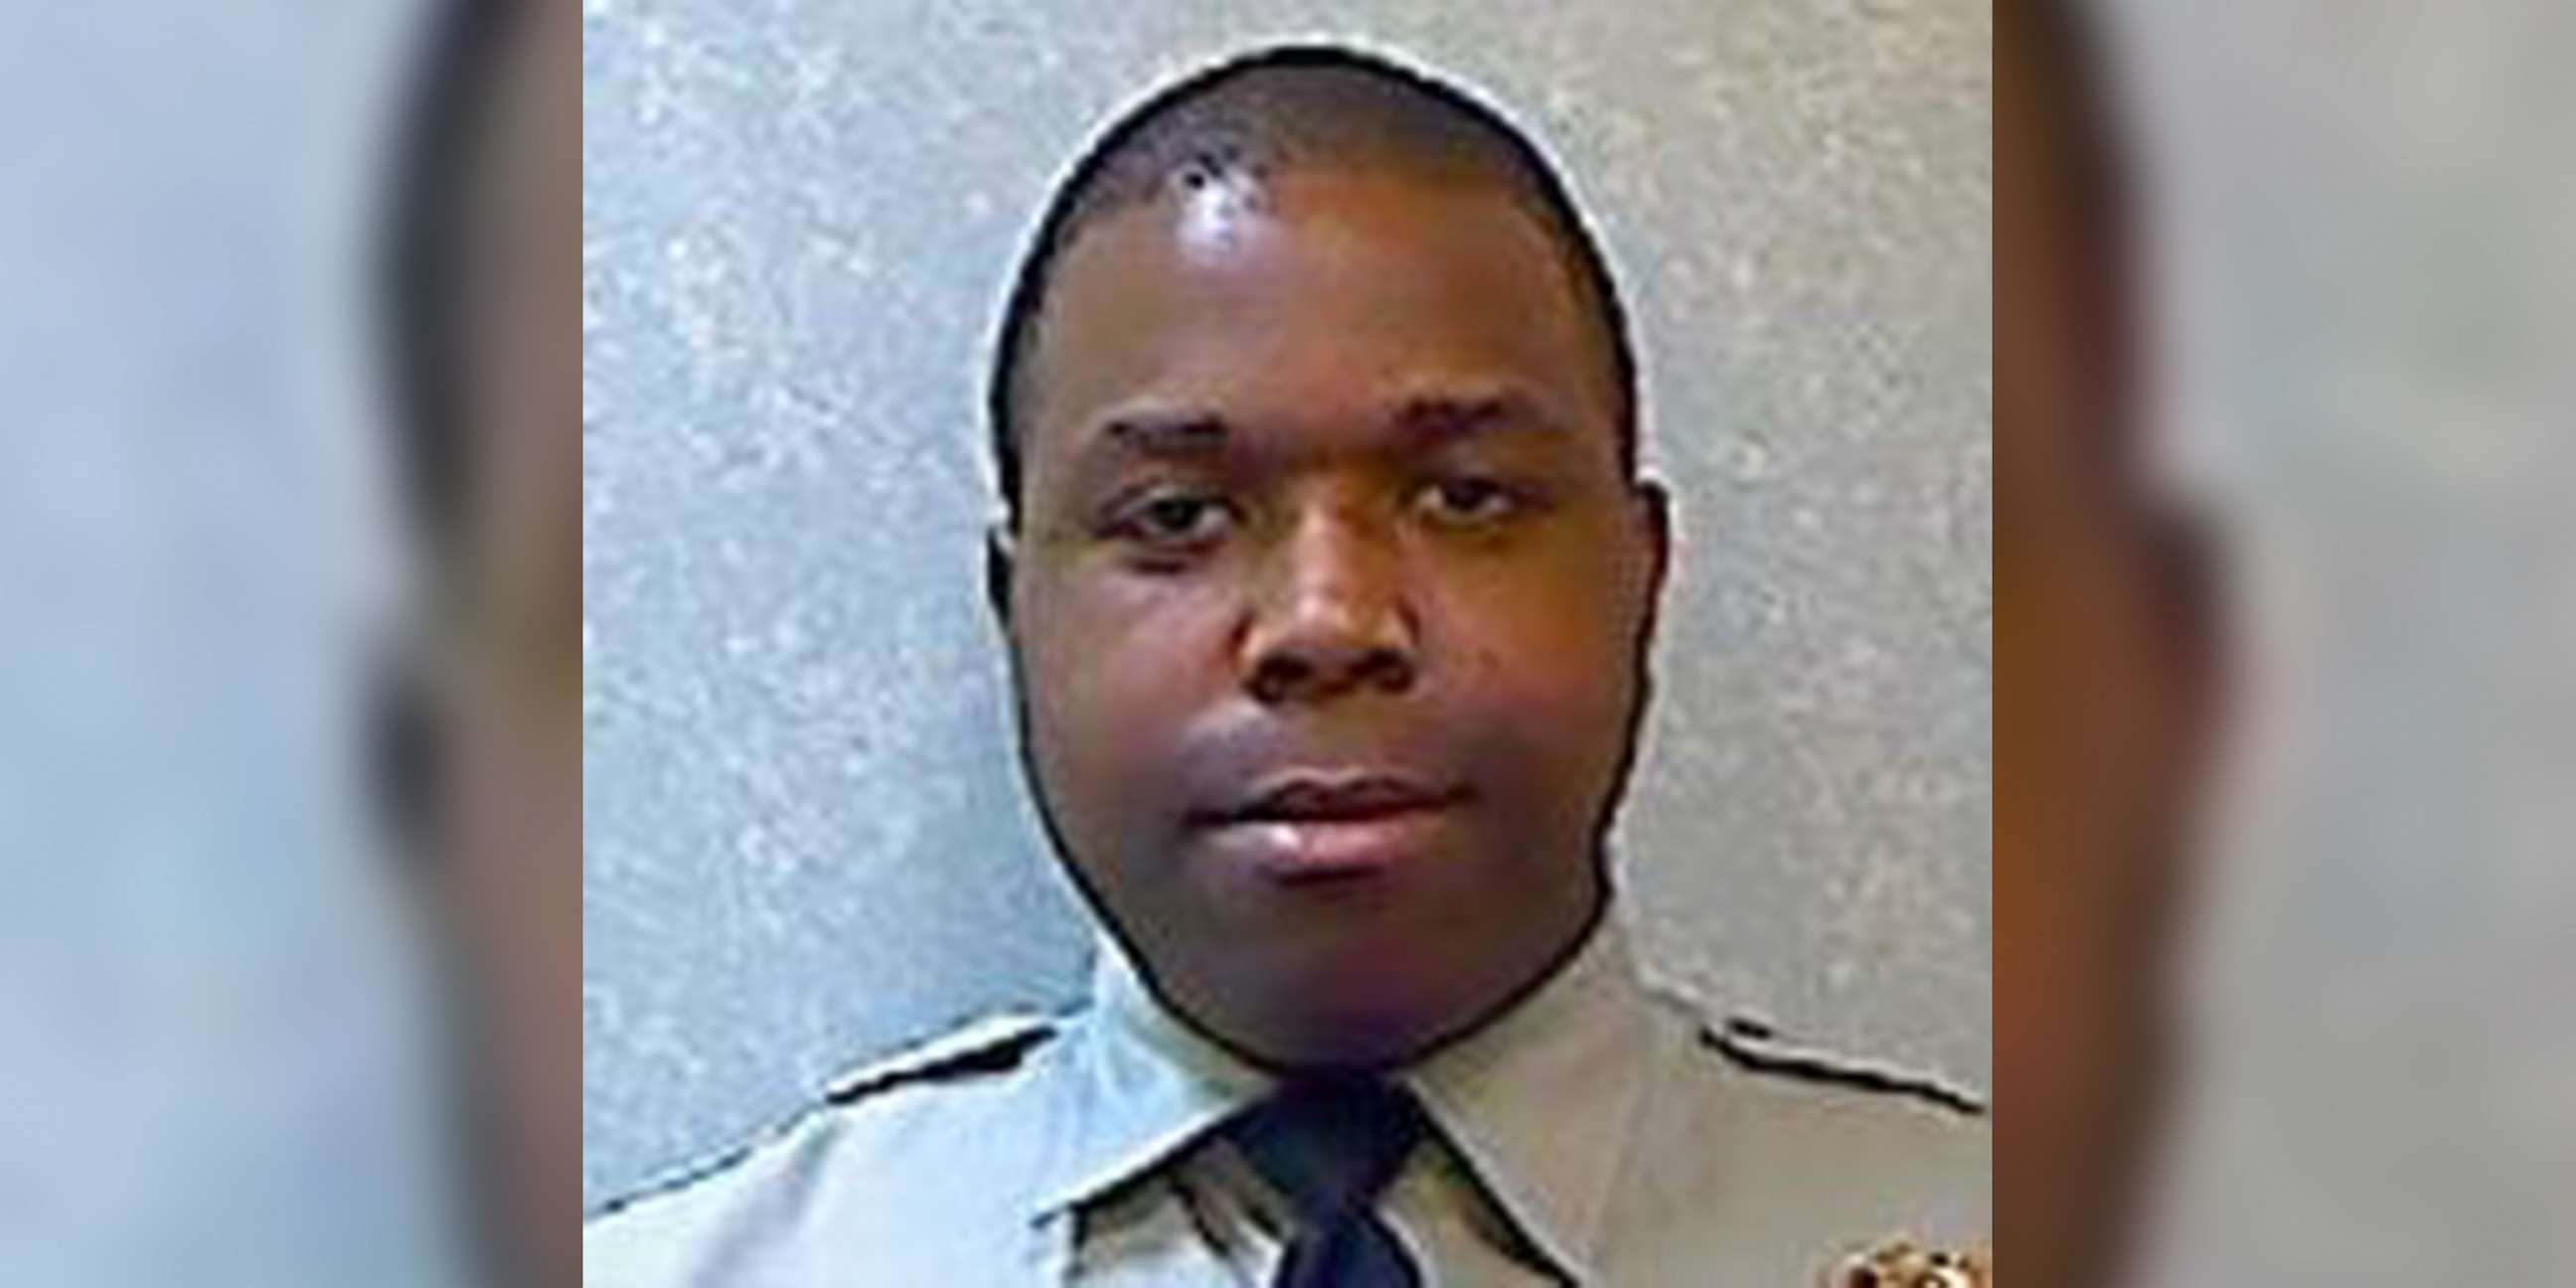 PHOTO: Prince George's County Police Department officer Michael Owen, Jr. was charged with murder on Tuesday after fatally shooting a suspect.